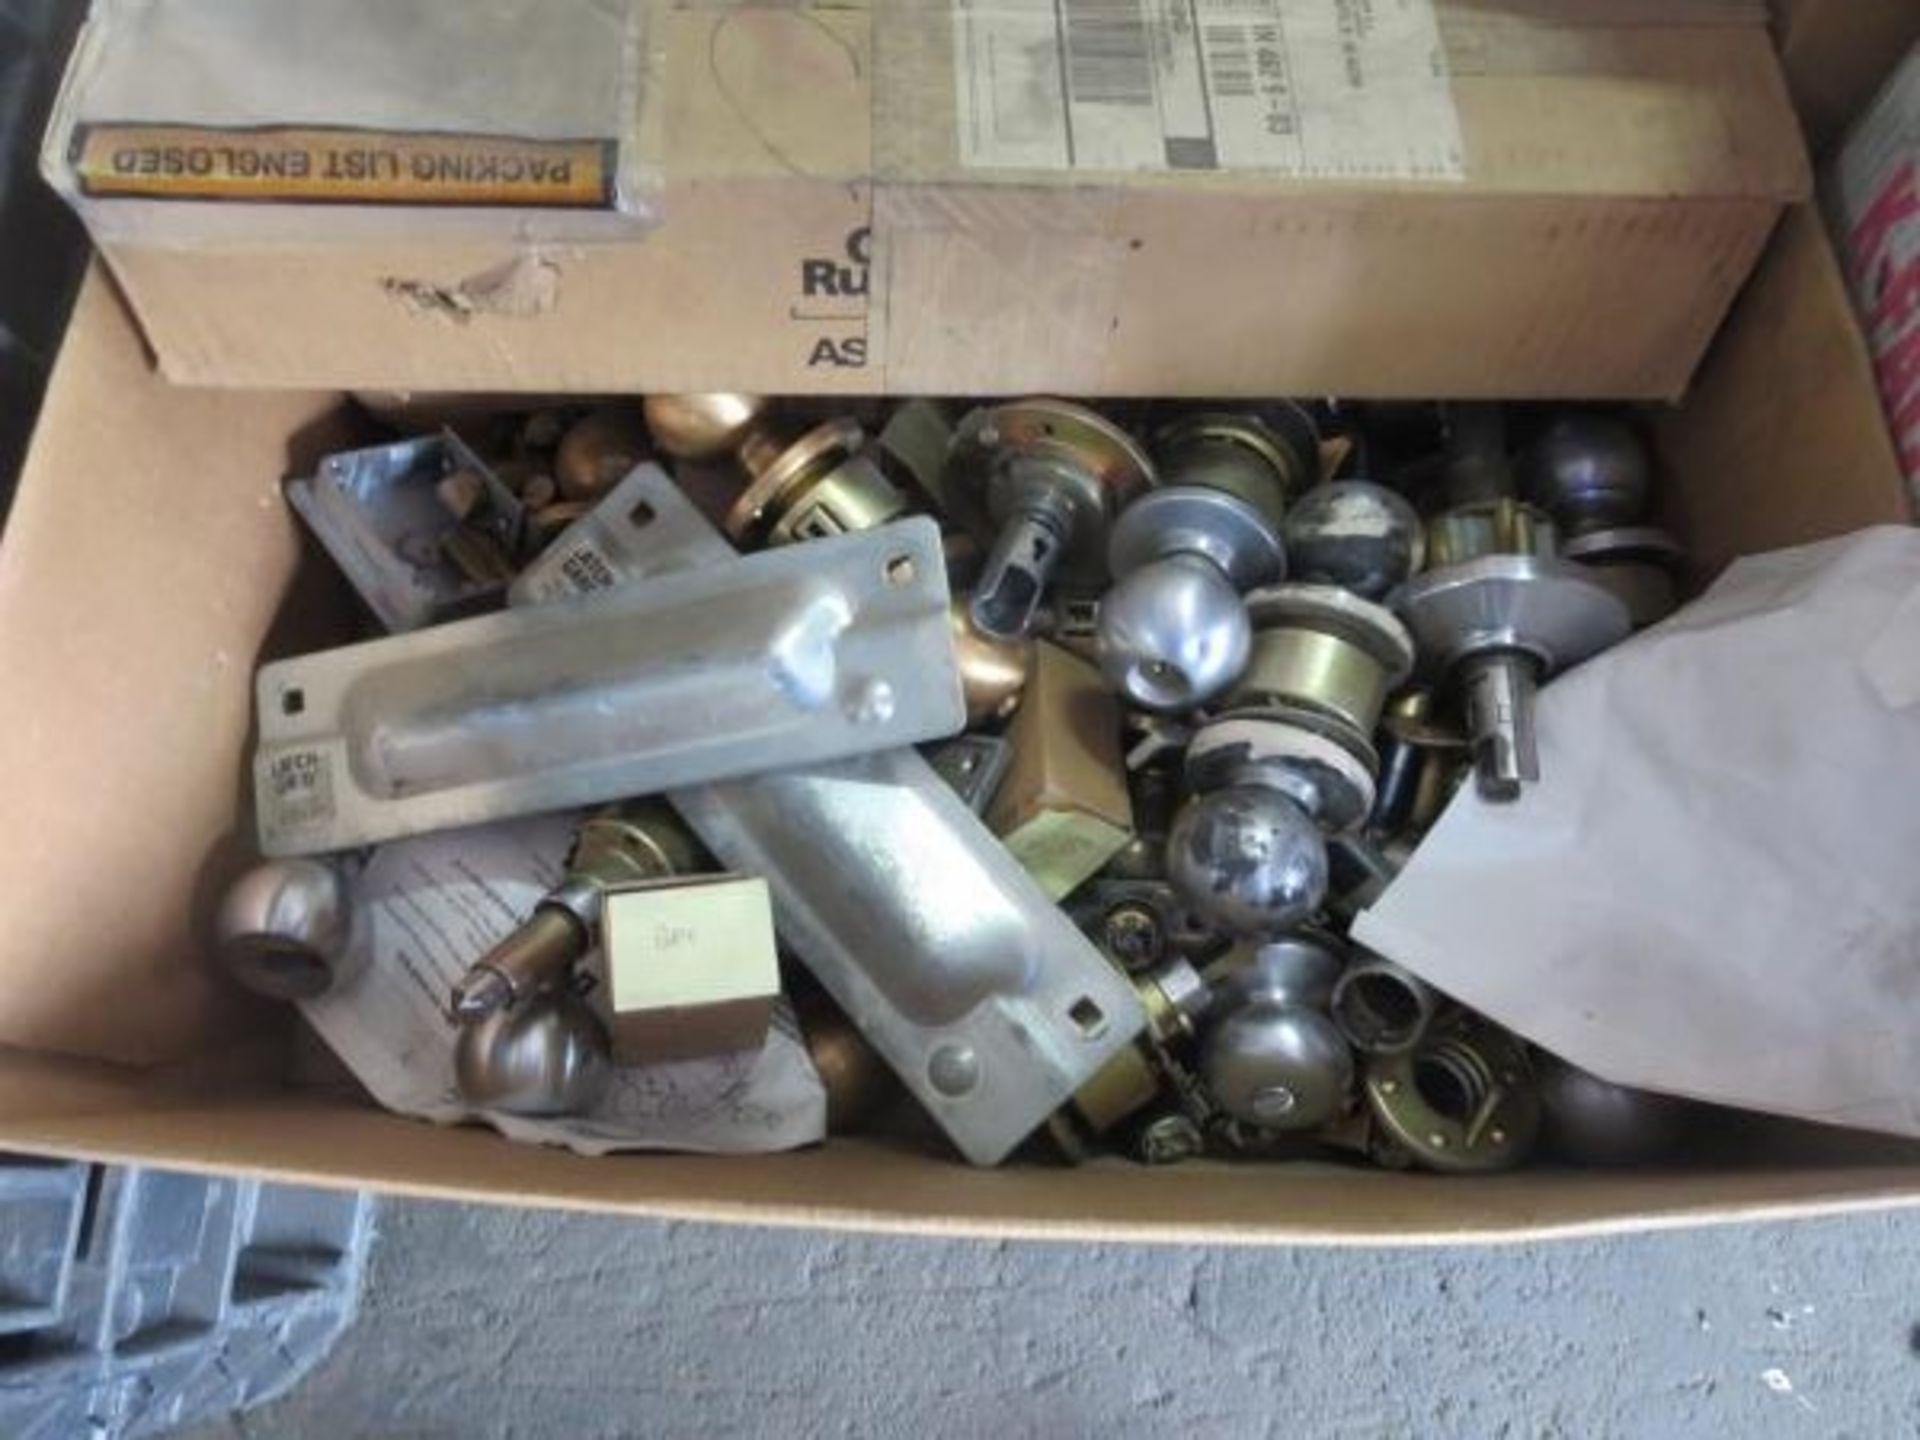 Lot (Qty 5 Skids) Consisting of pipe fittings, Electrical cords, Industrial Lights, Gear box, heavy - Bild 13 aus 18